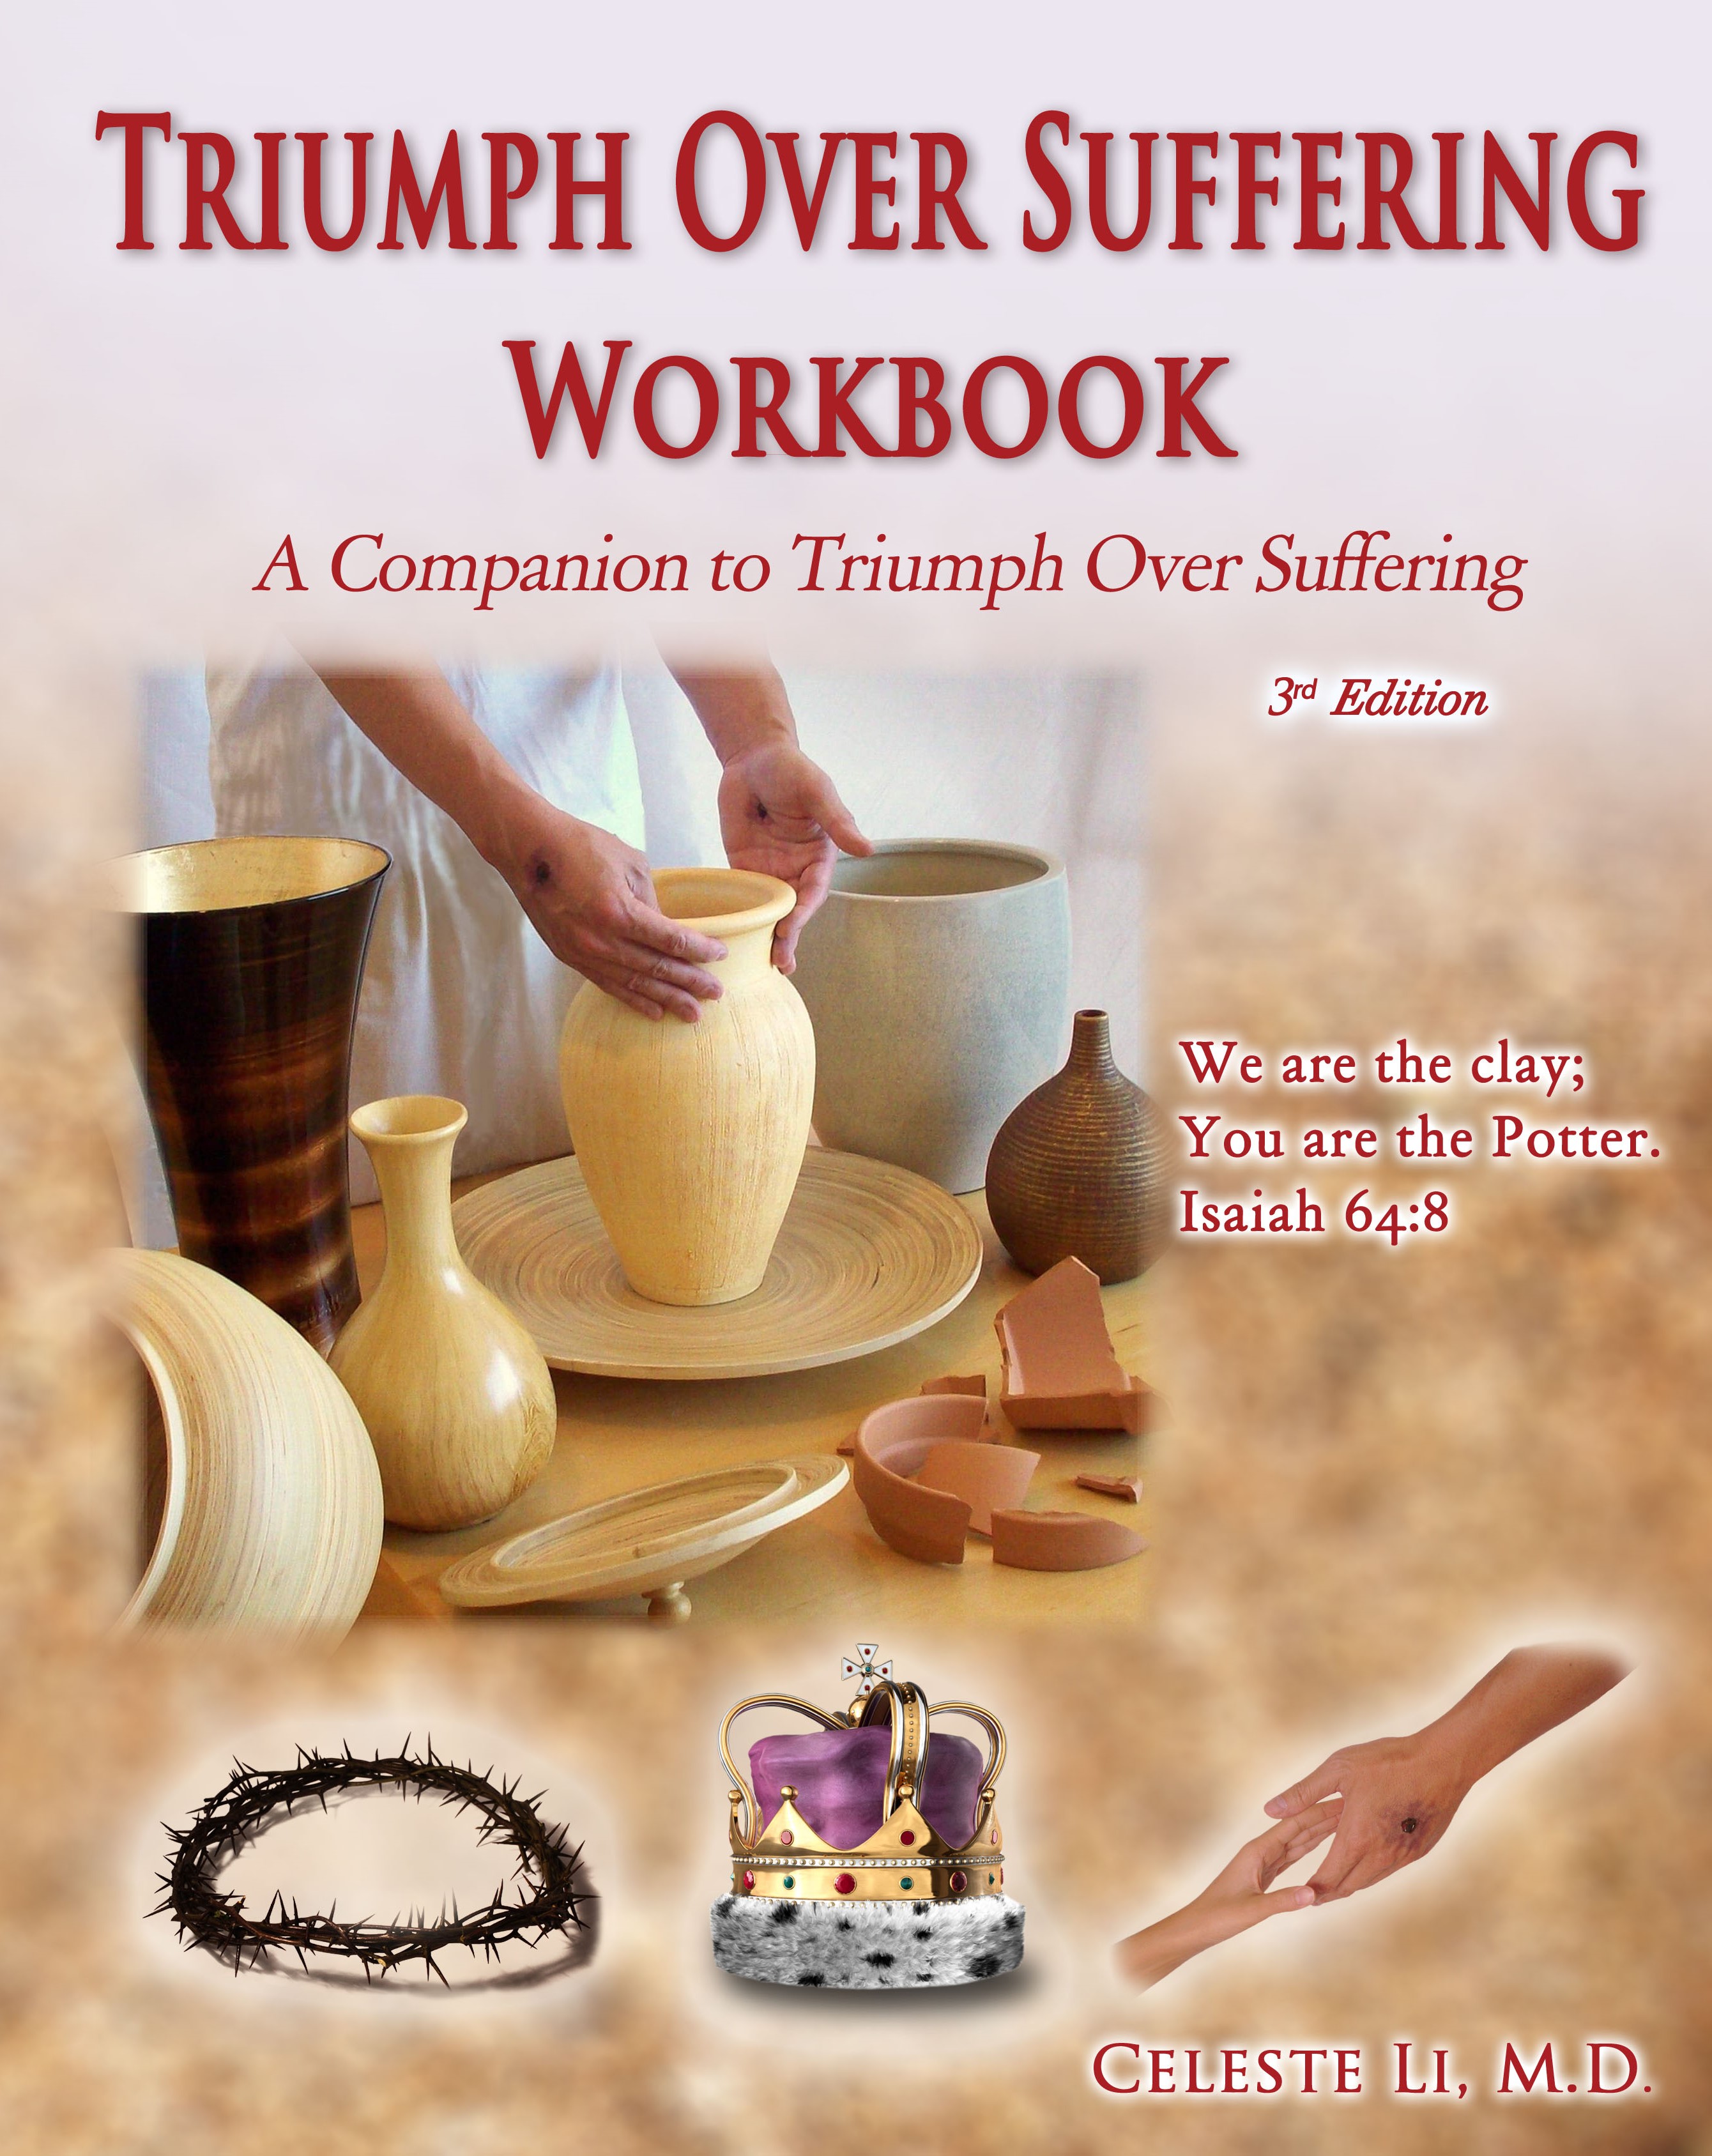 Workbook front cover